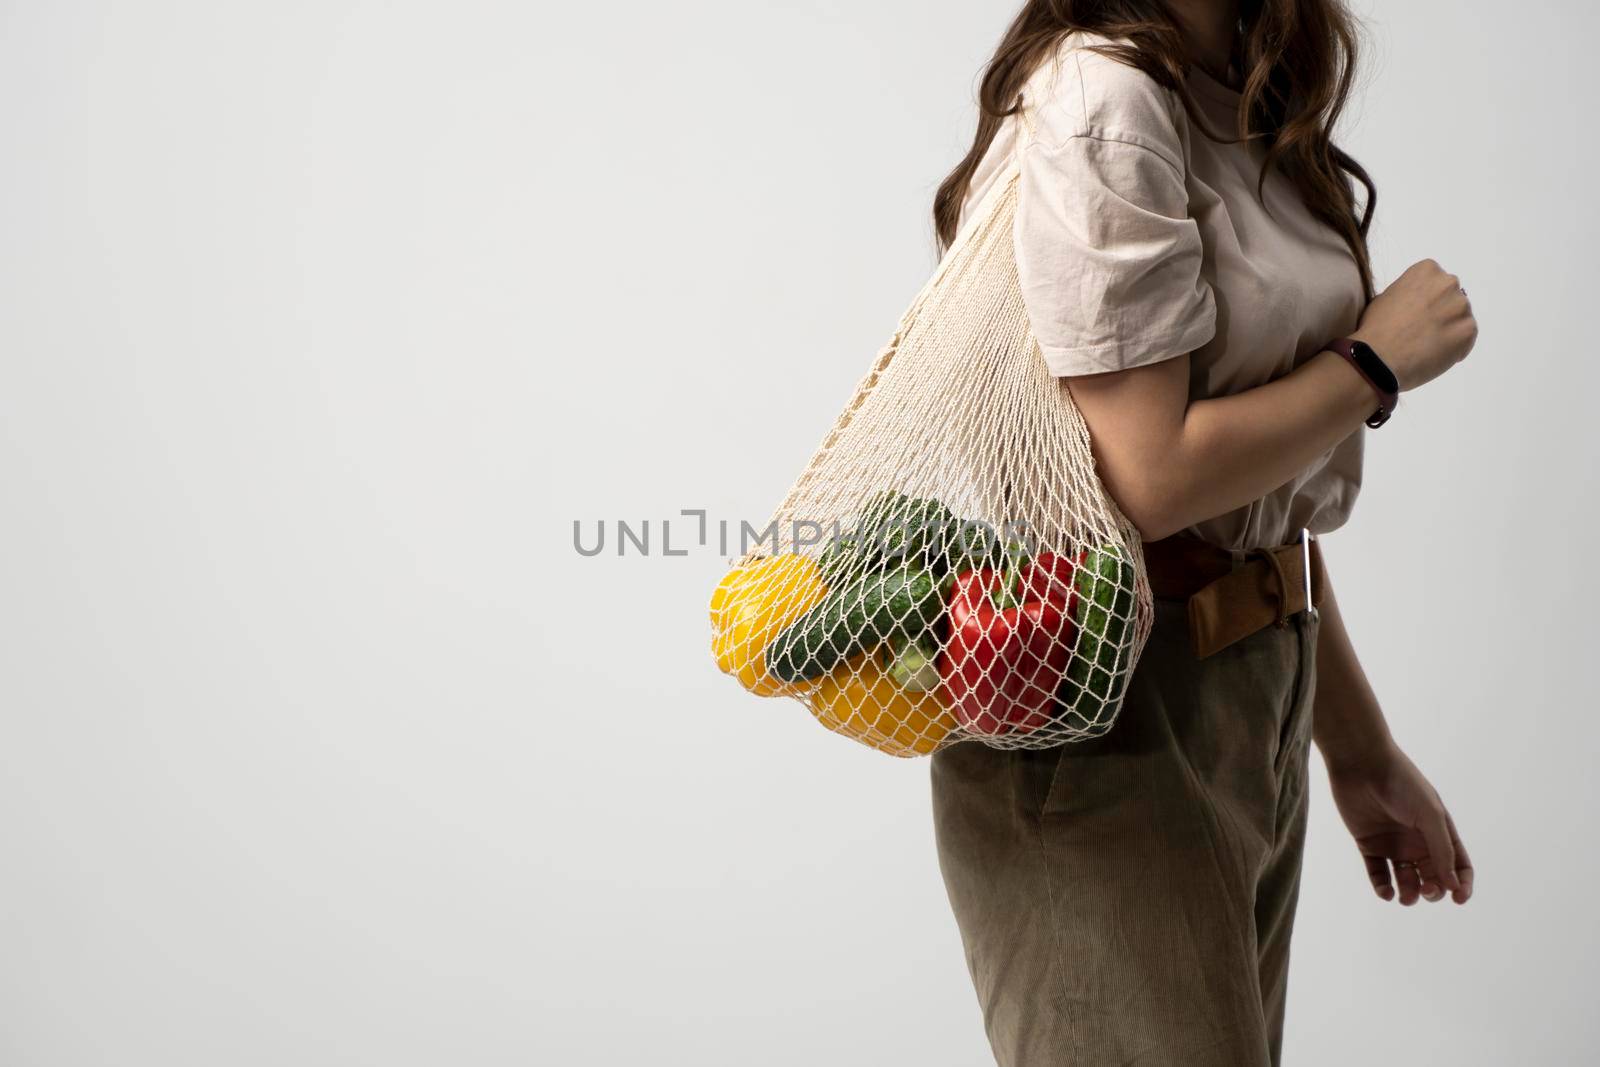 Reusable eco bag for shopping. String shopping bag with fruits and vegetables in the hands of a young woman. Zero waste, plastic free concept. Eco lifestyle. Eco shopping. by vovsht